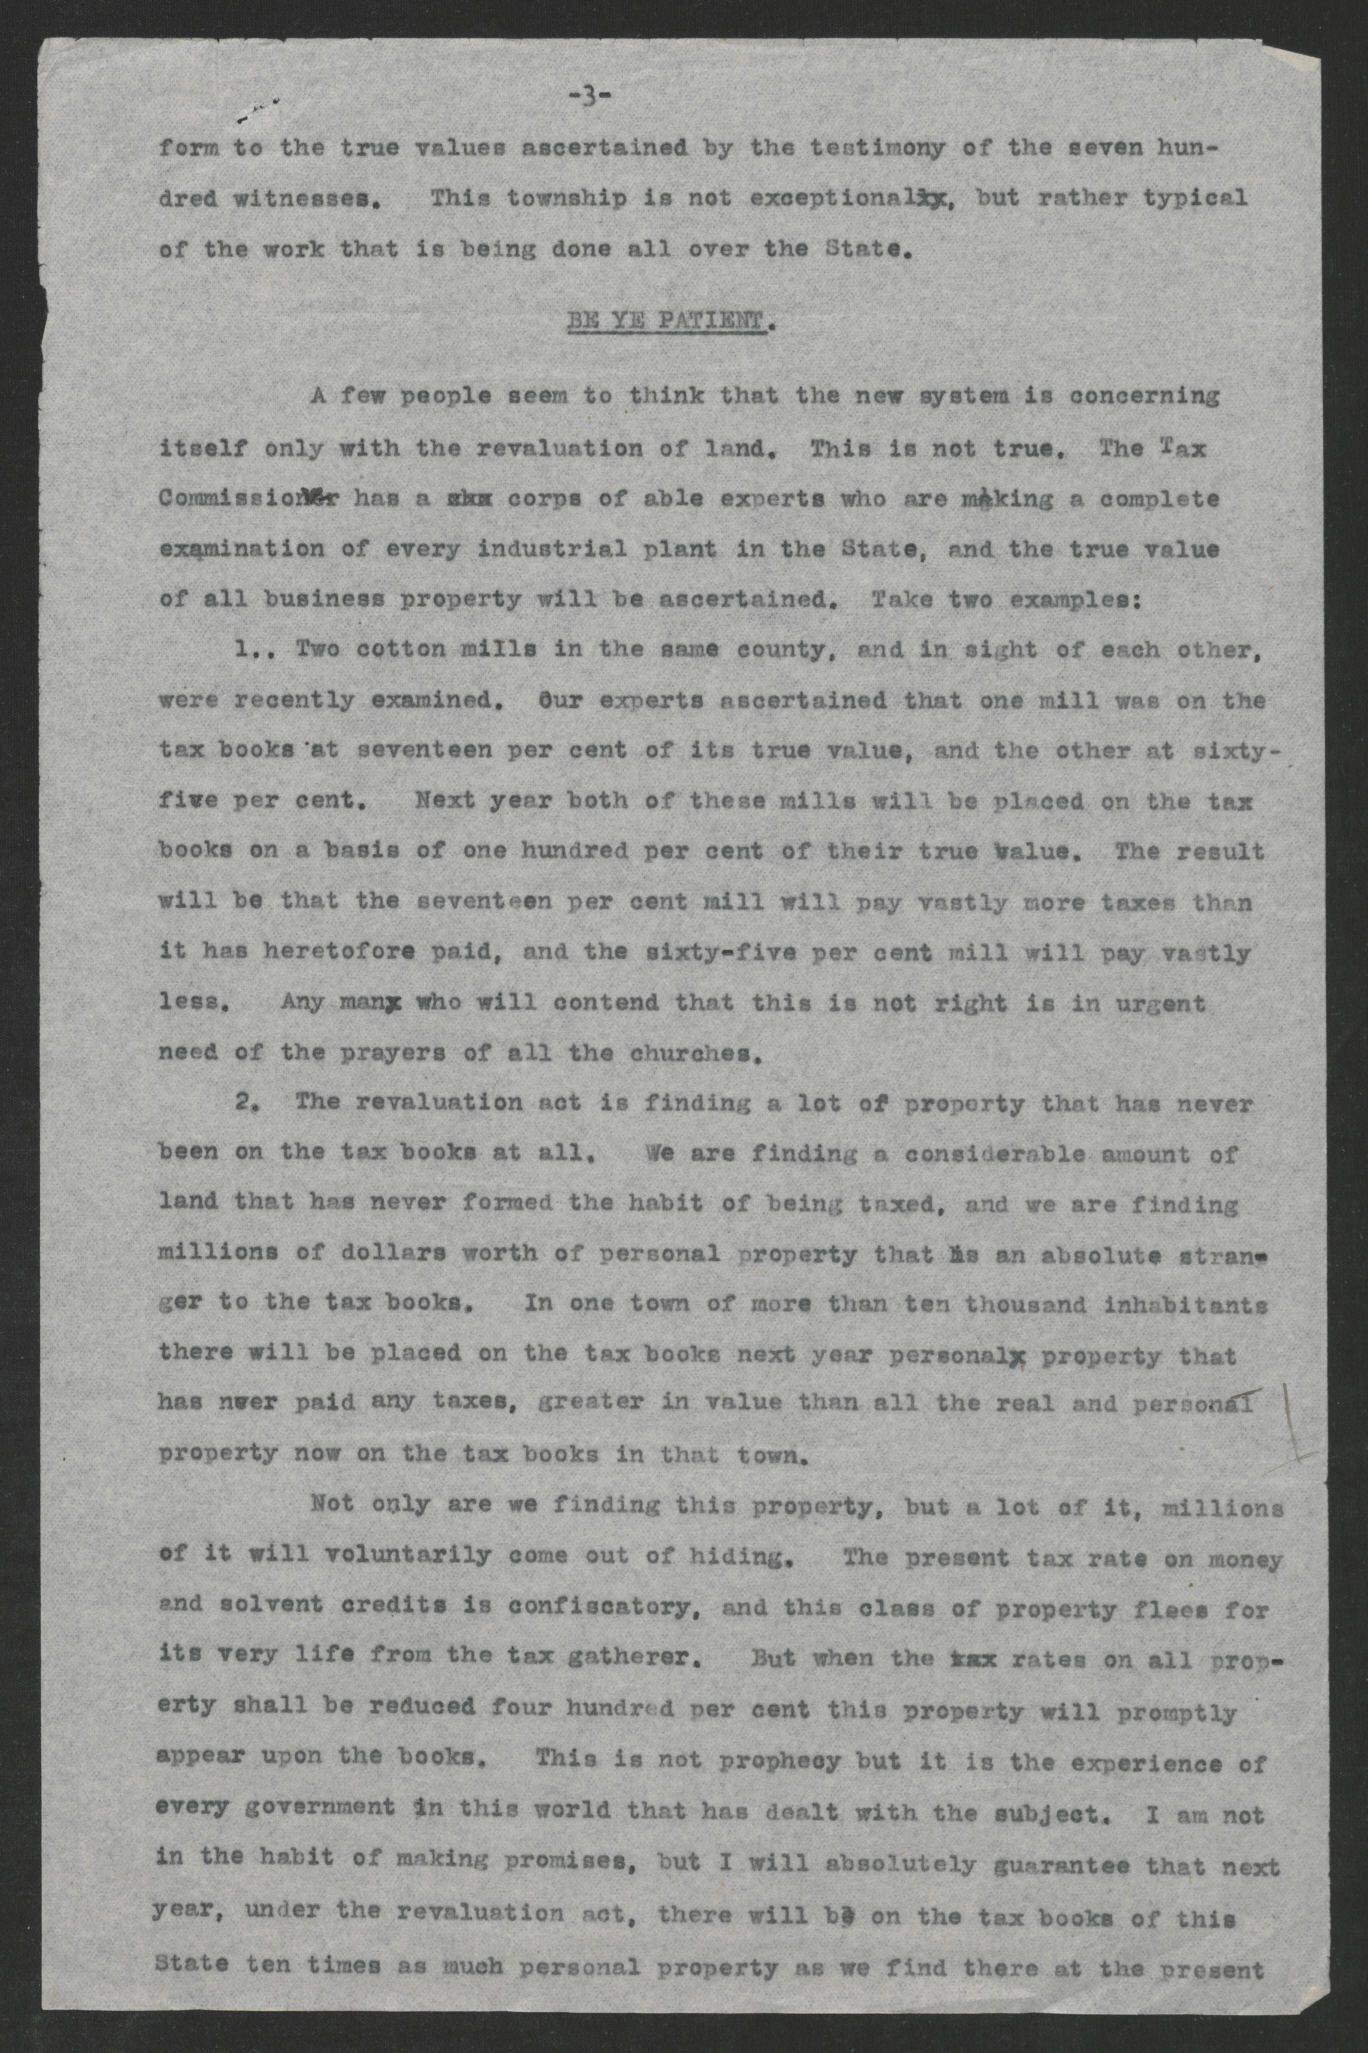 Address Before the Teachers' Assembly by Governor Thomas W. Bickett, November 28, 1919, page 3